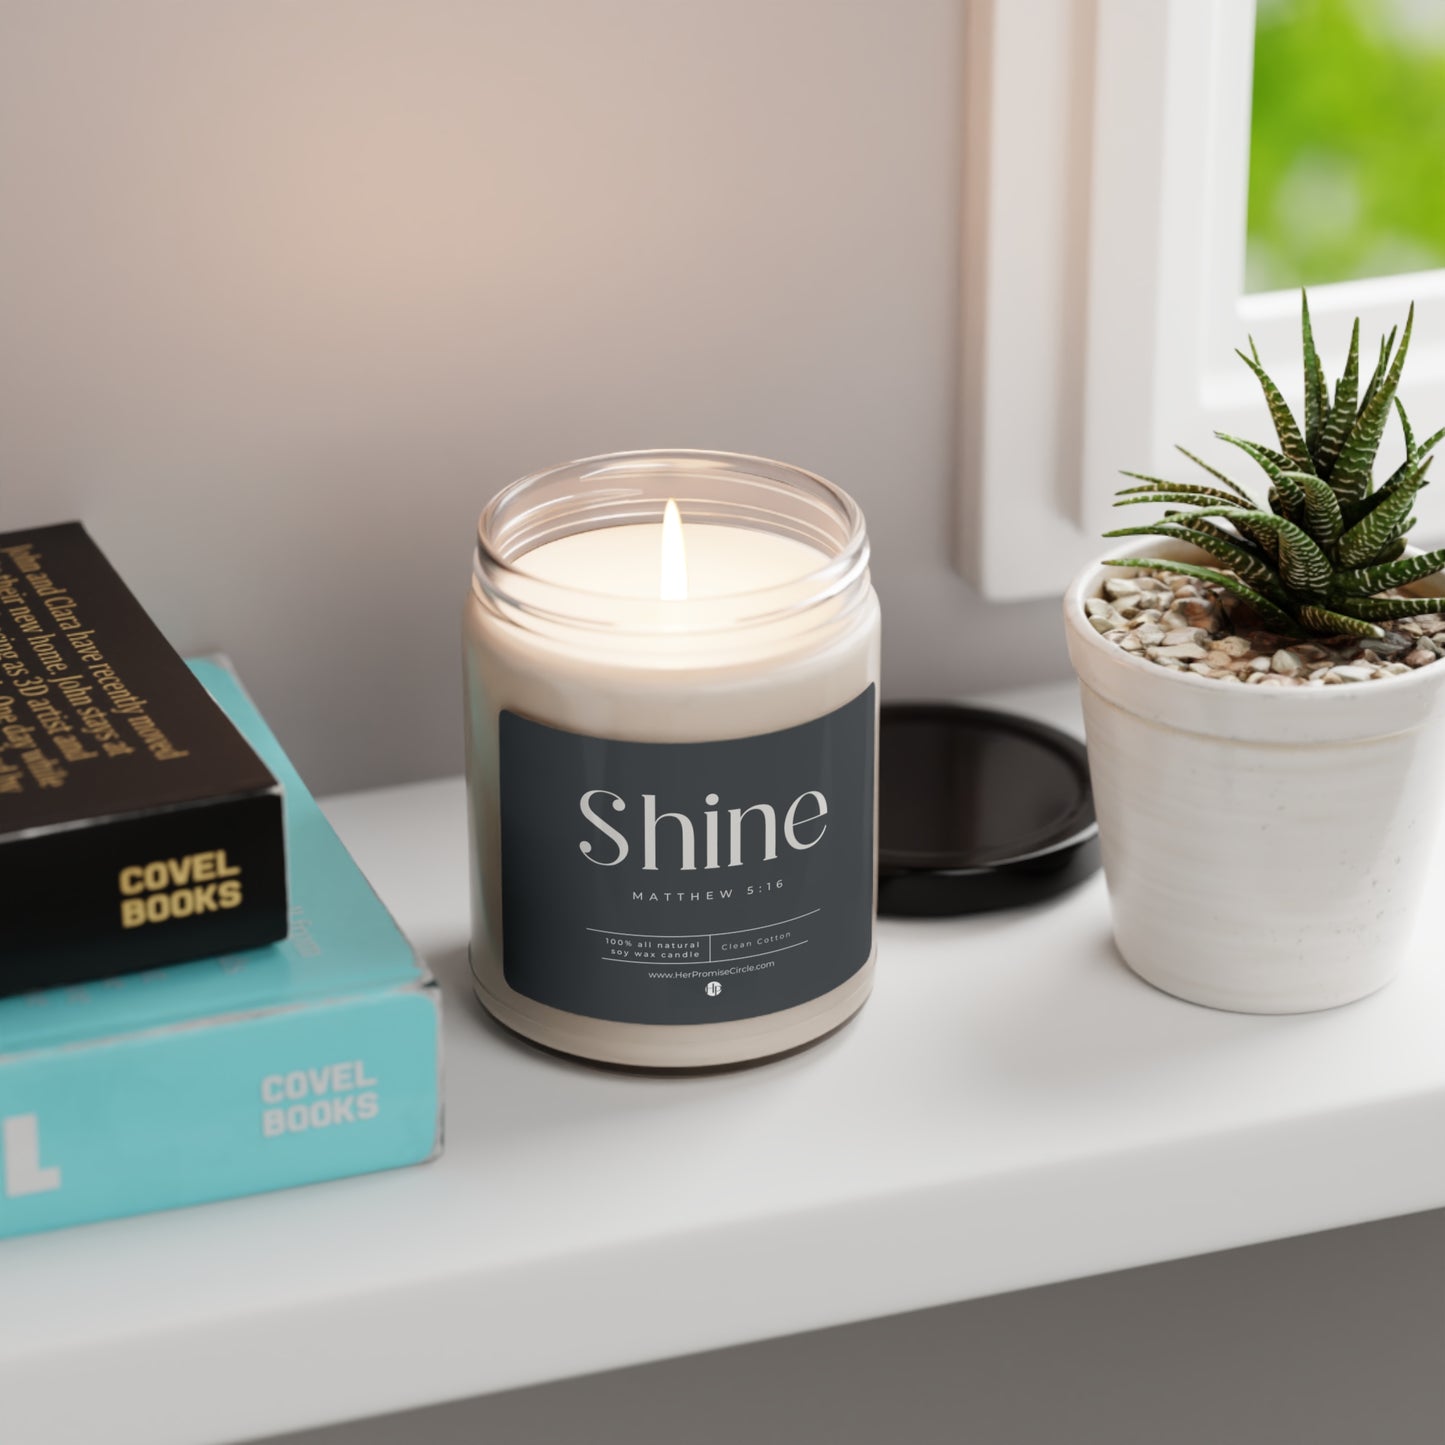 "Shine" Scented Soy Candle, 9oz